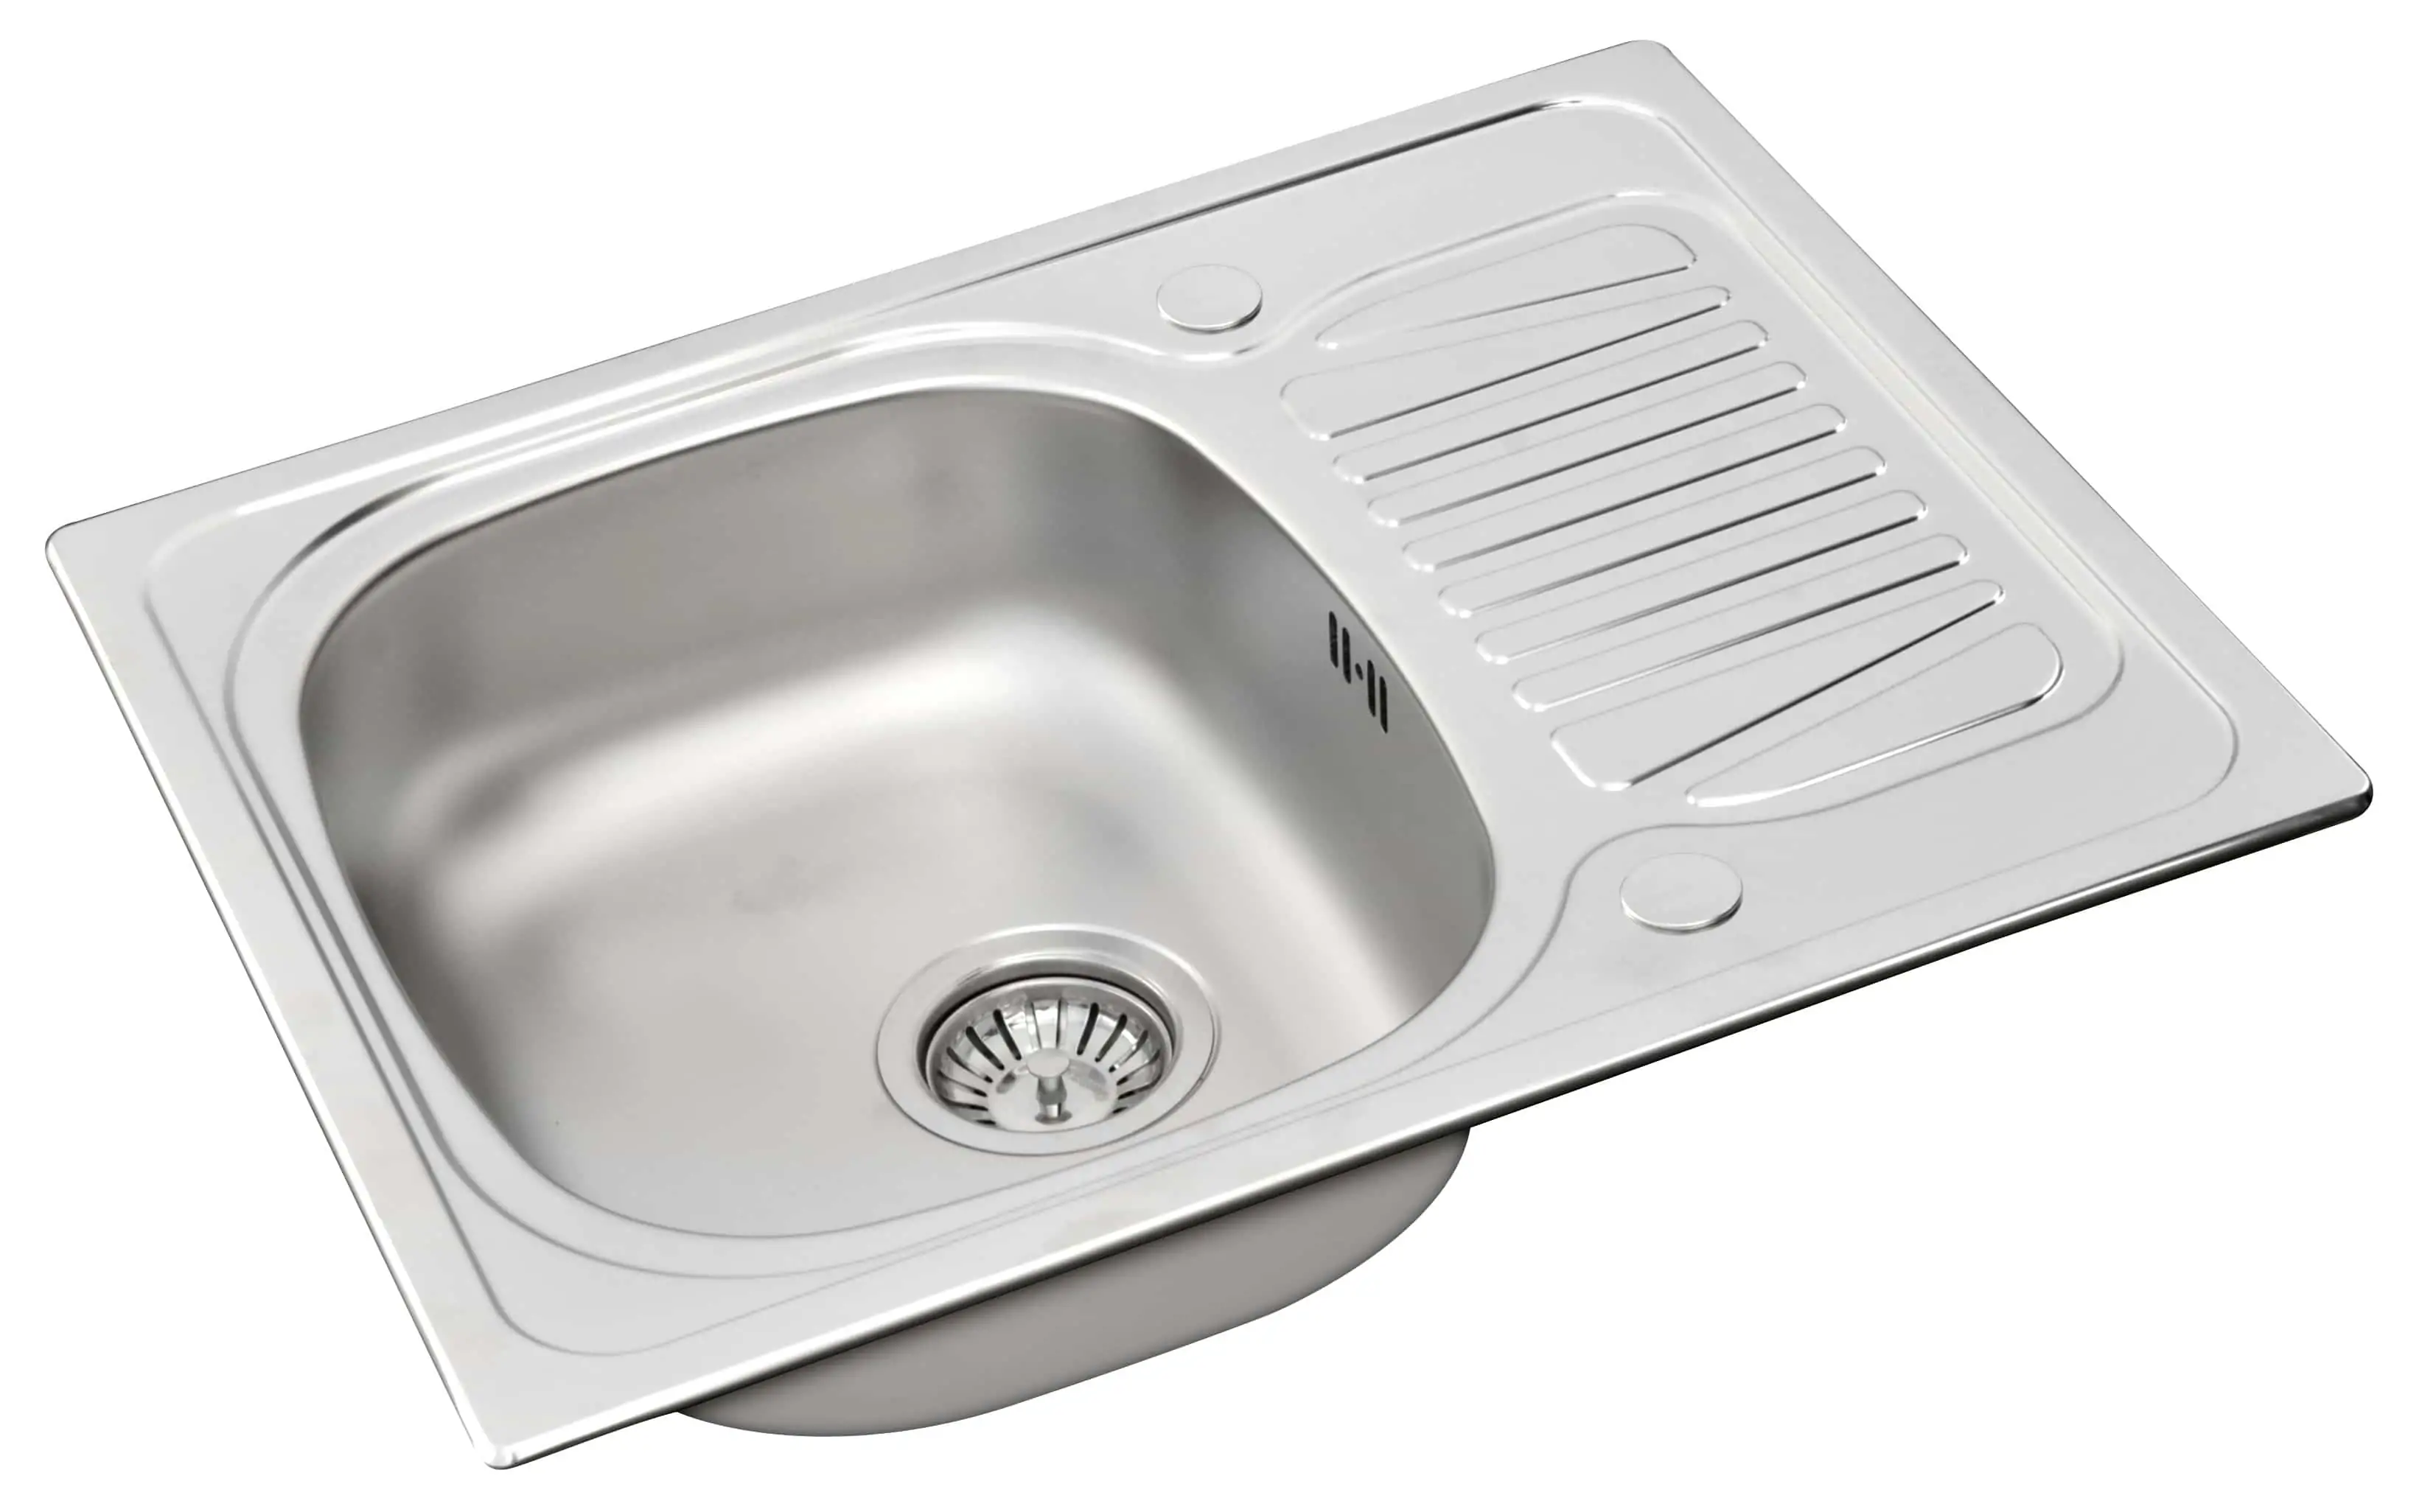 Sparta compact single bowl sink